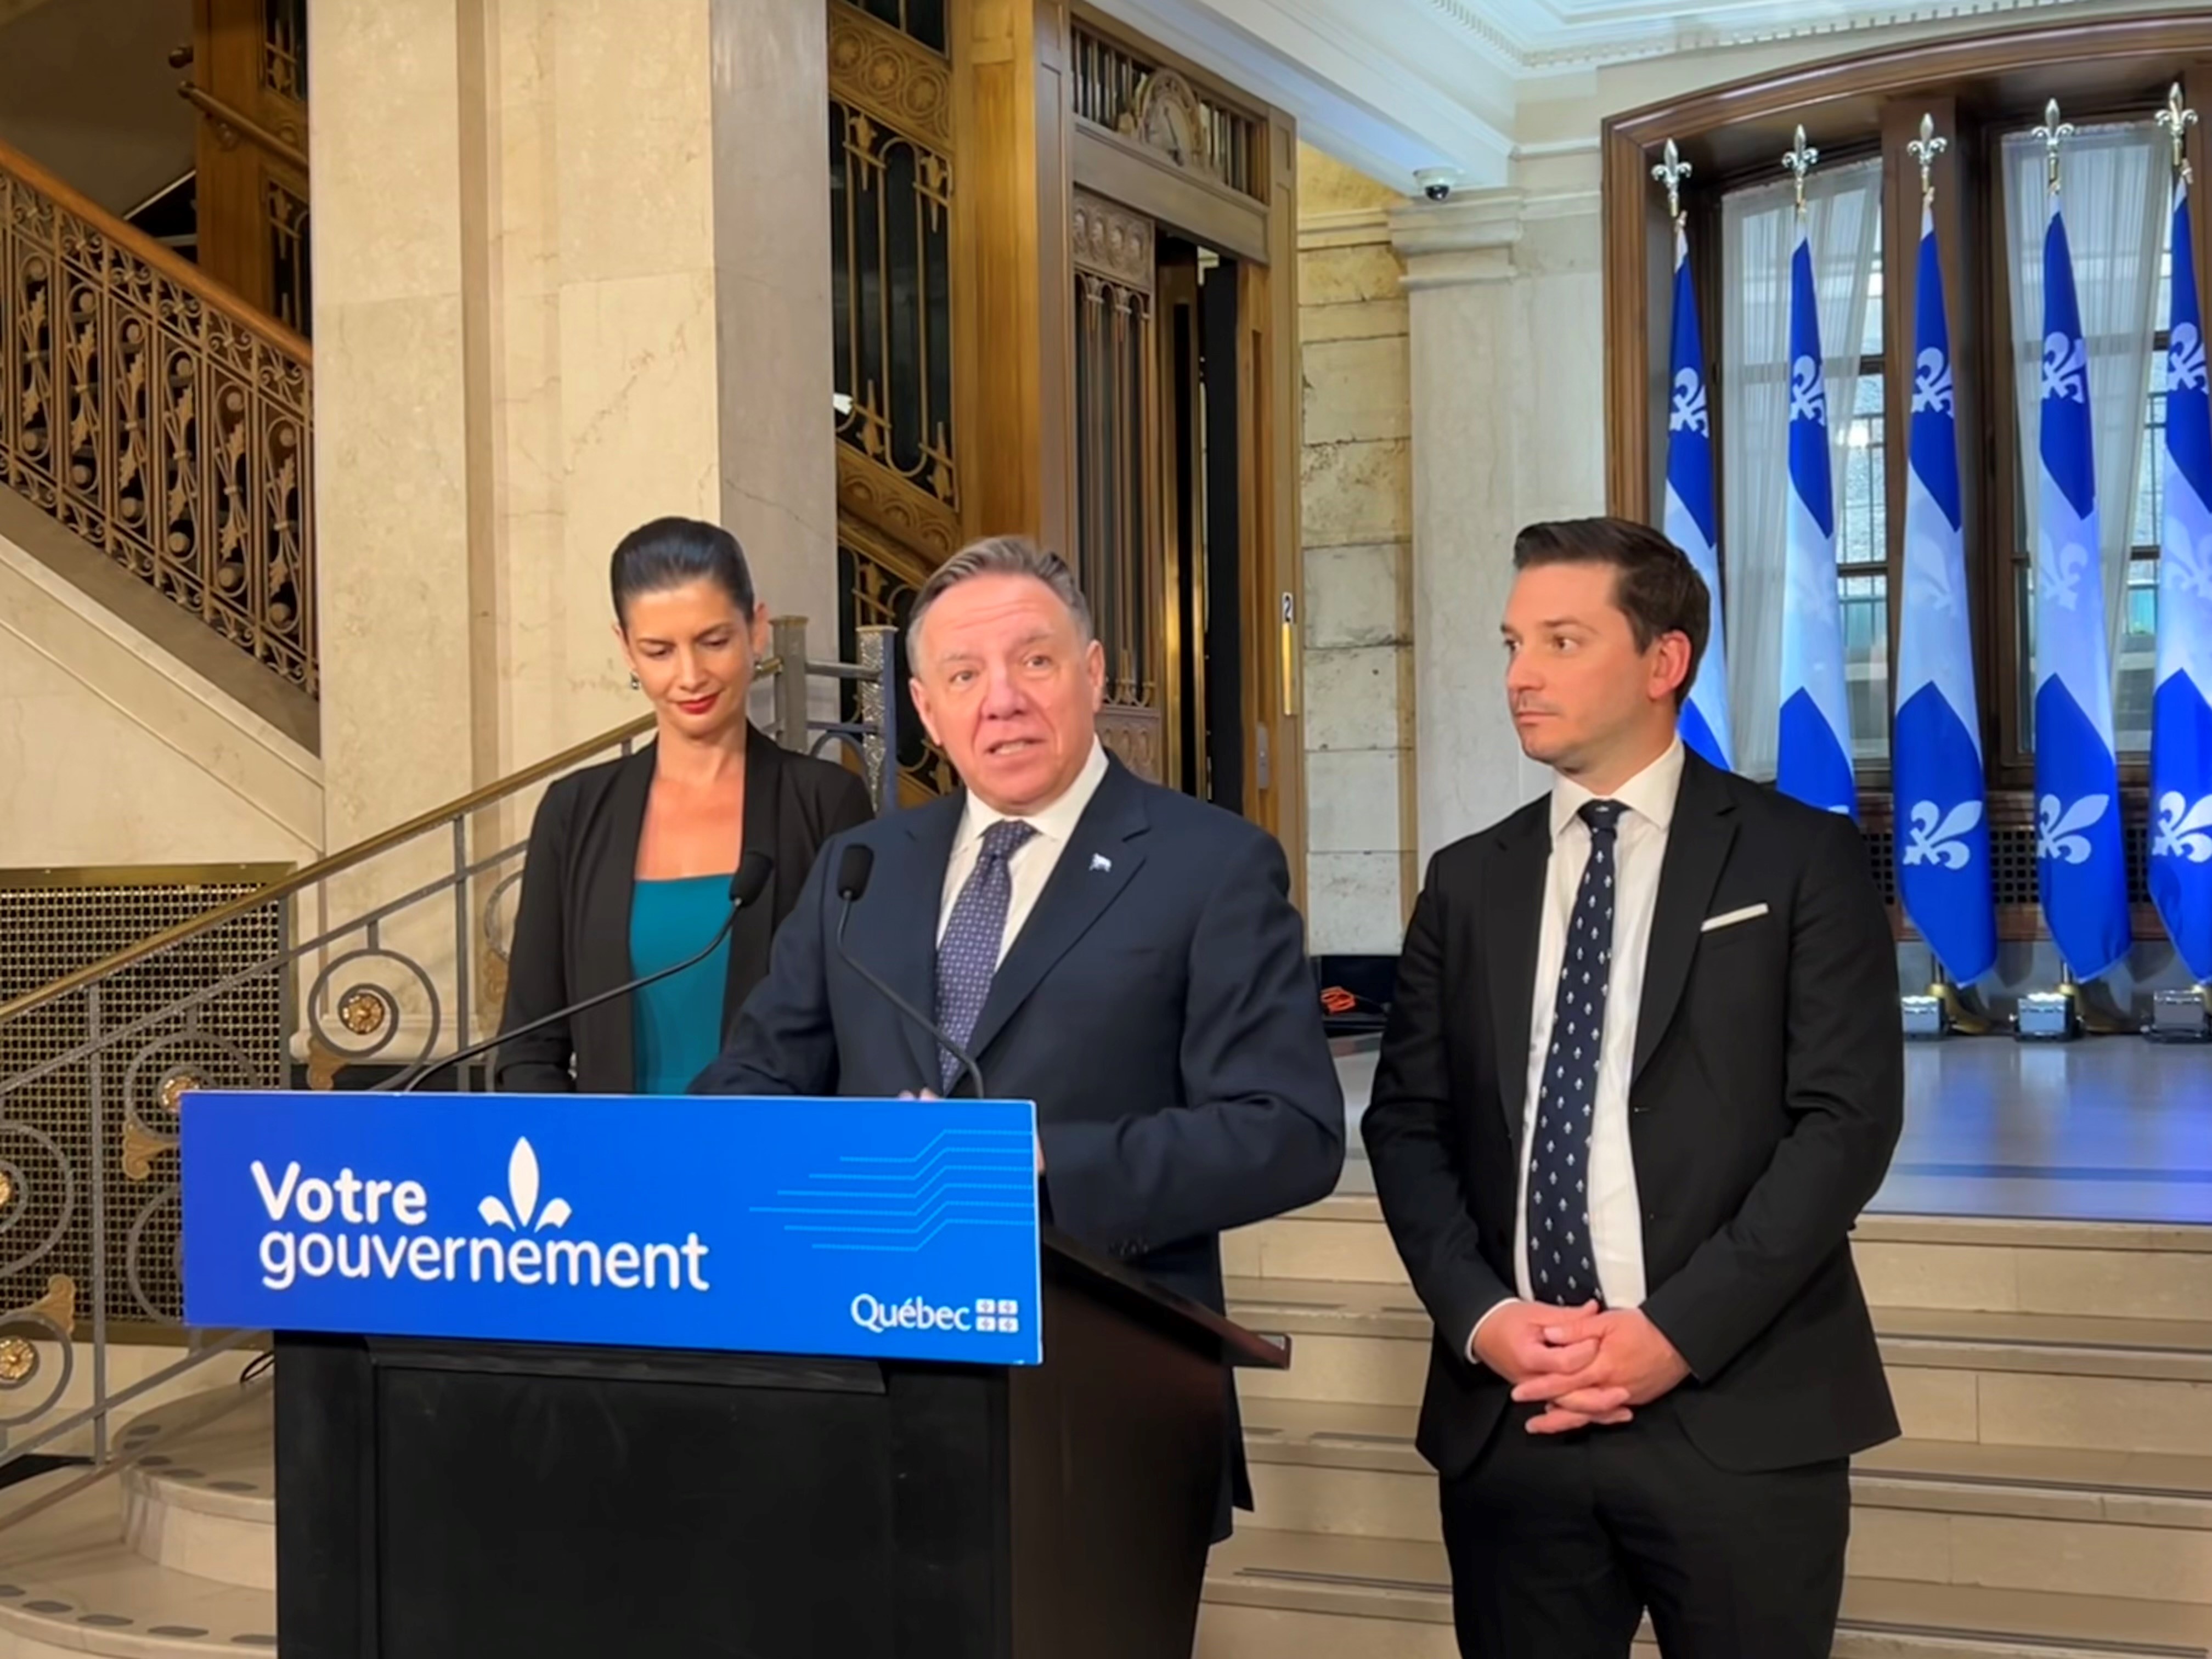 Quebec’s parliamentary session ends with quest to reclaim powers
from Ottawa